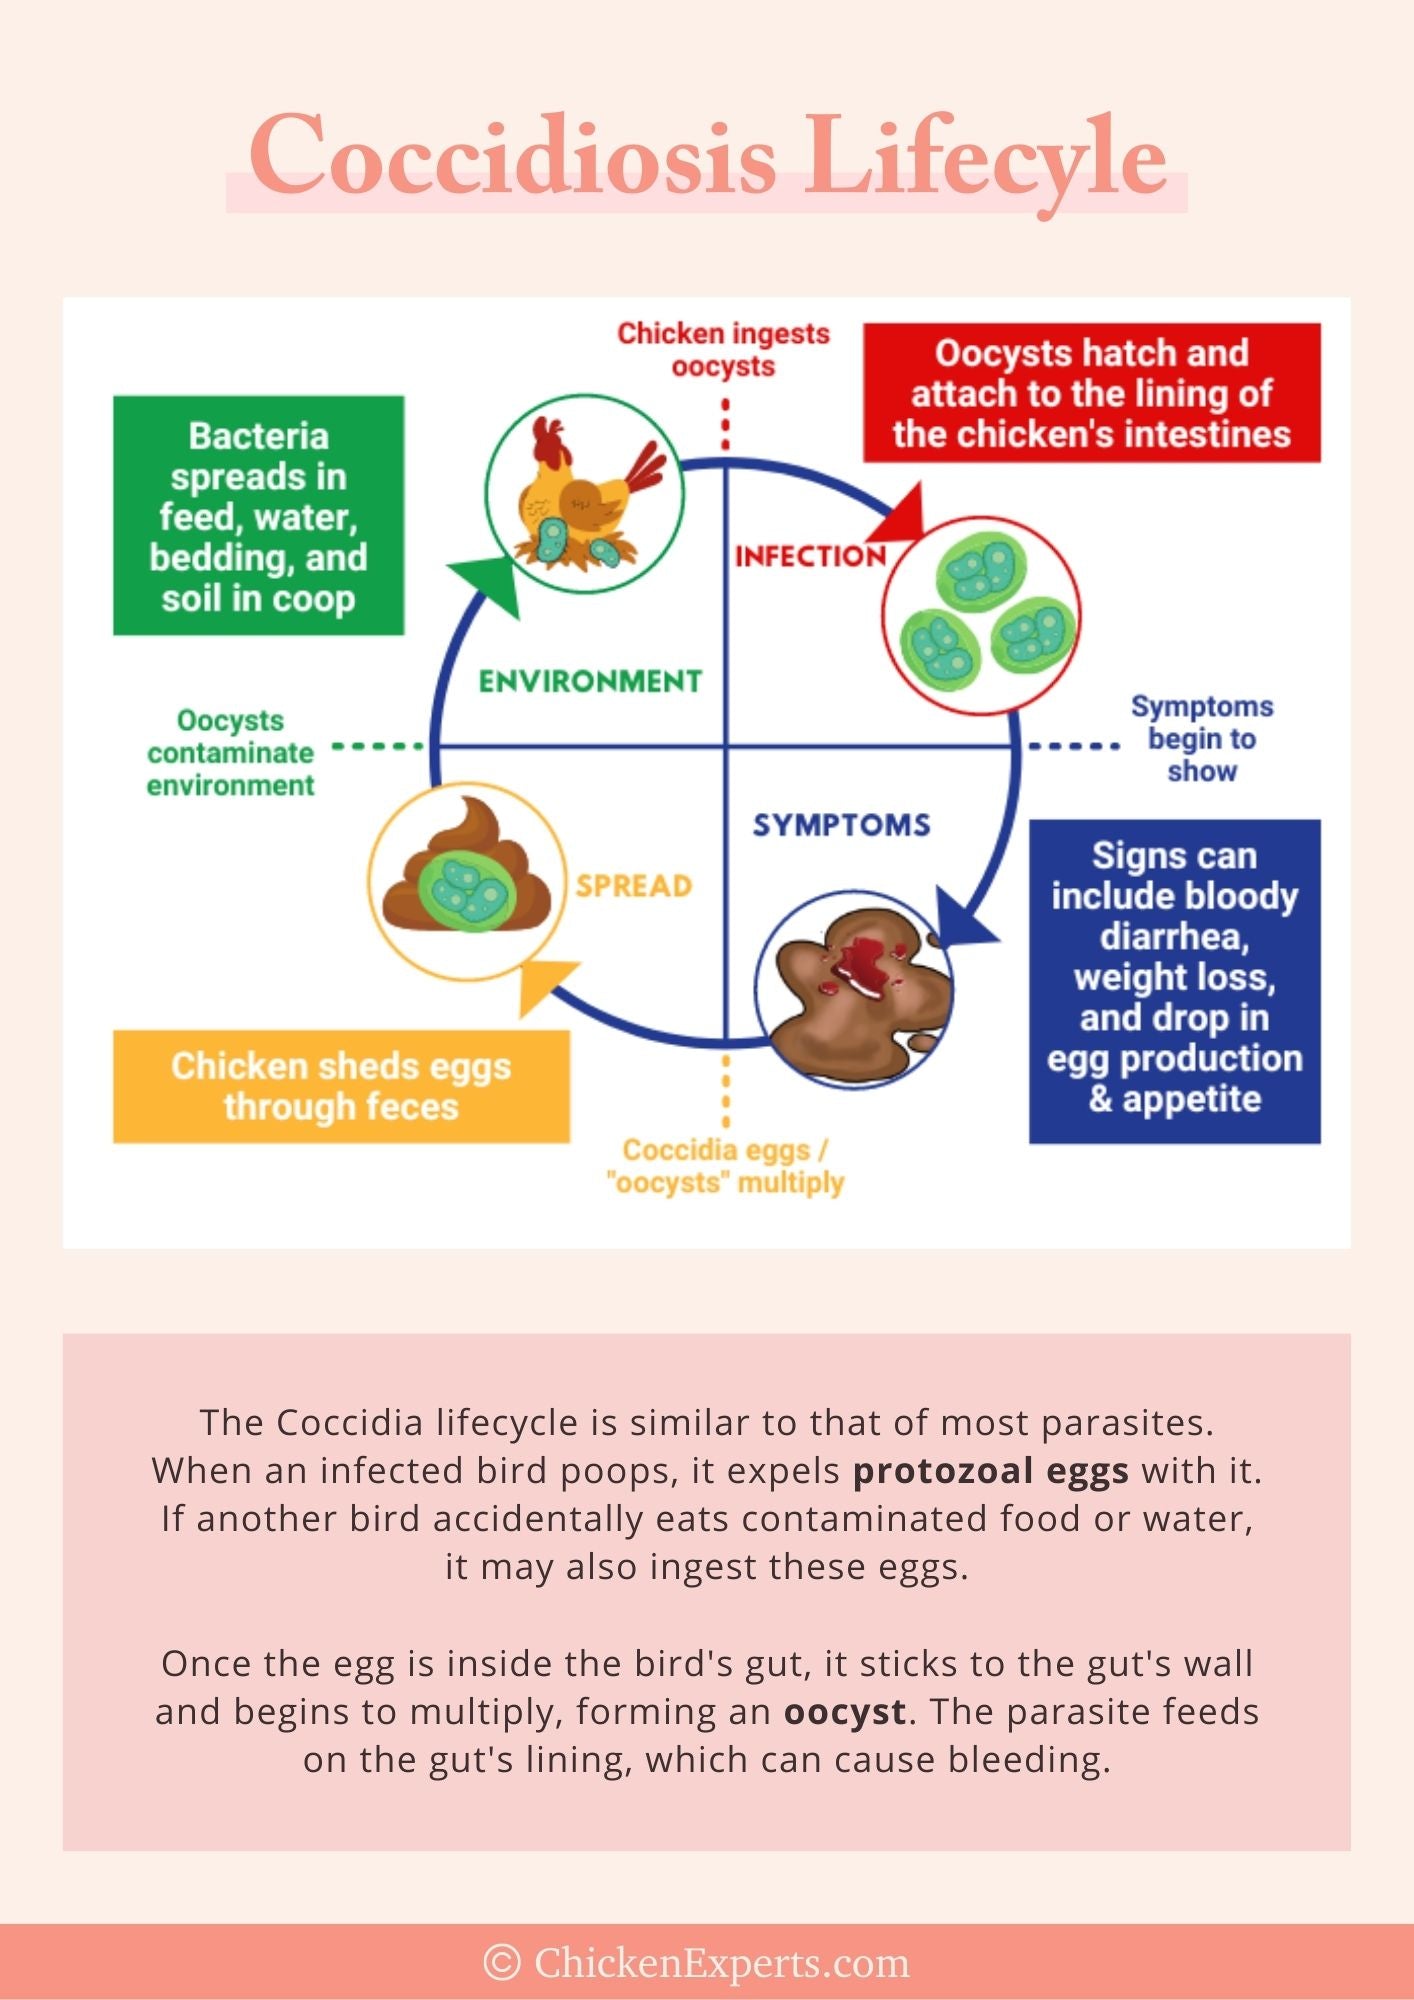 coccidiosis lifecycle